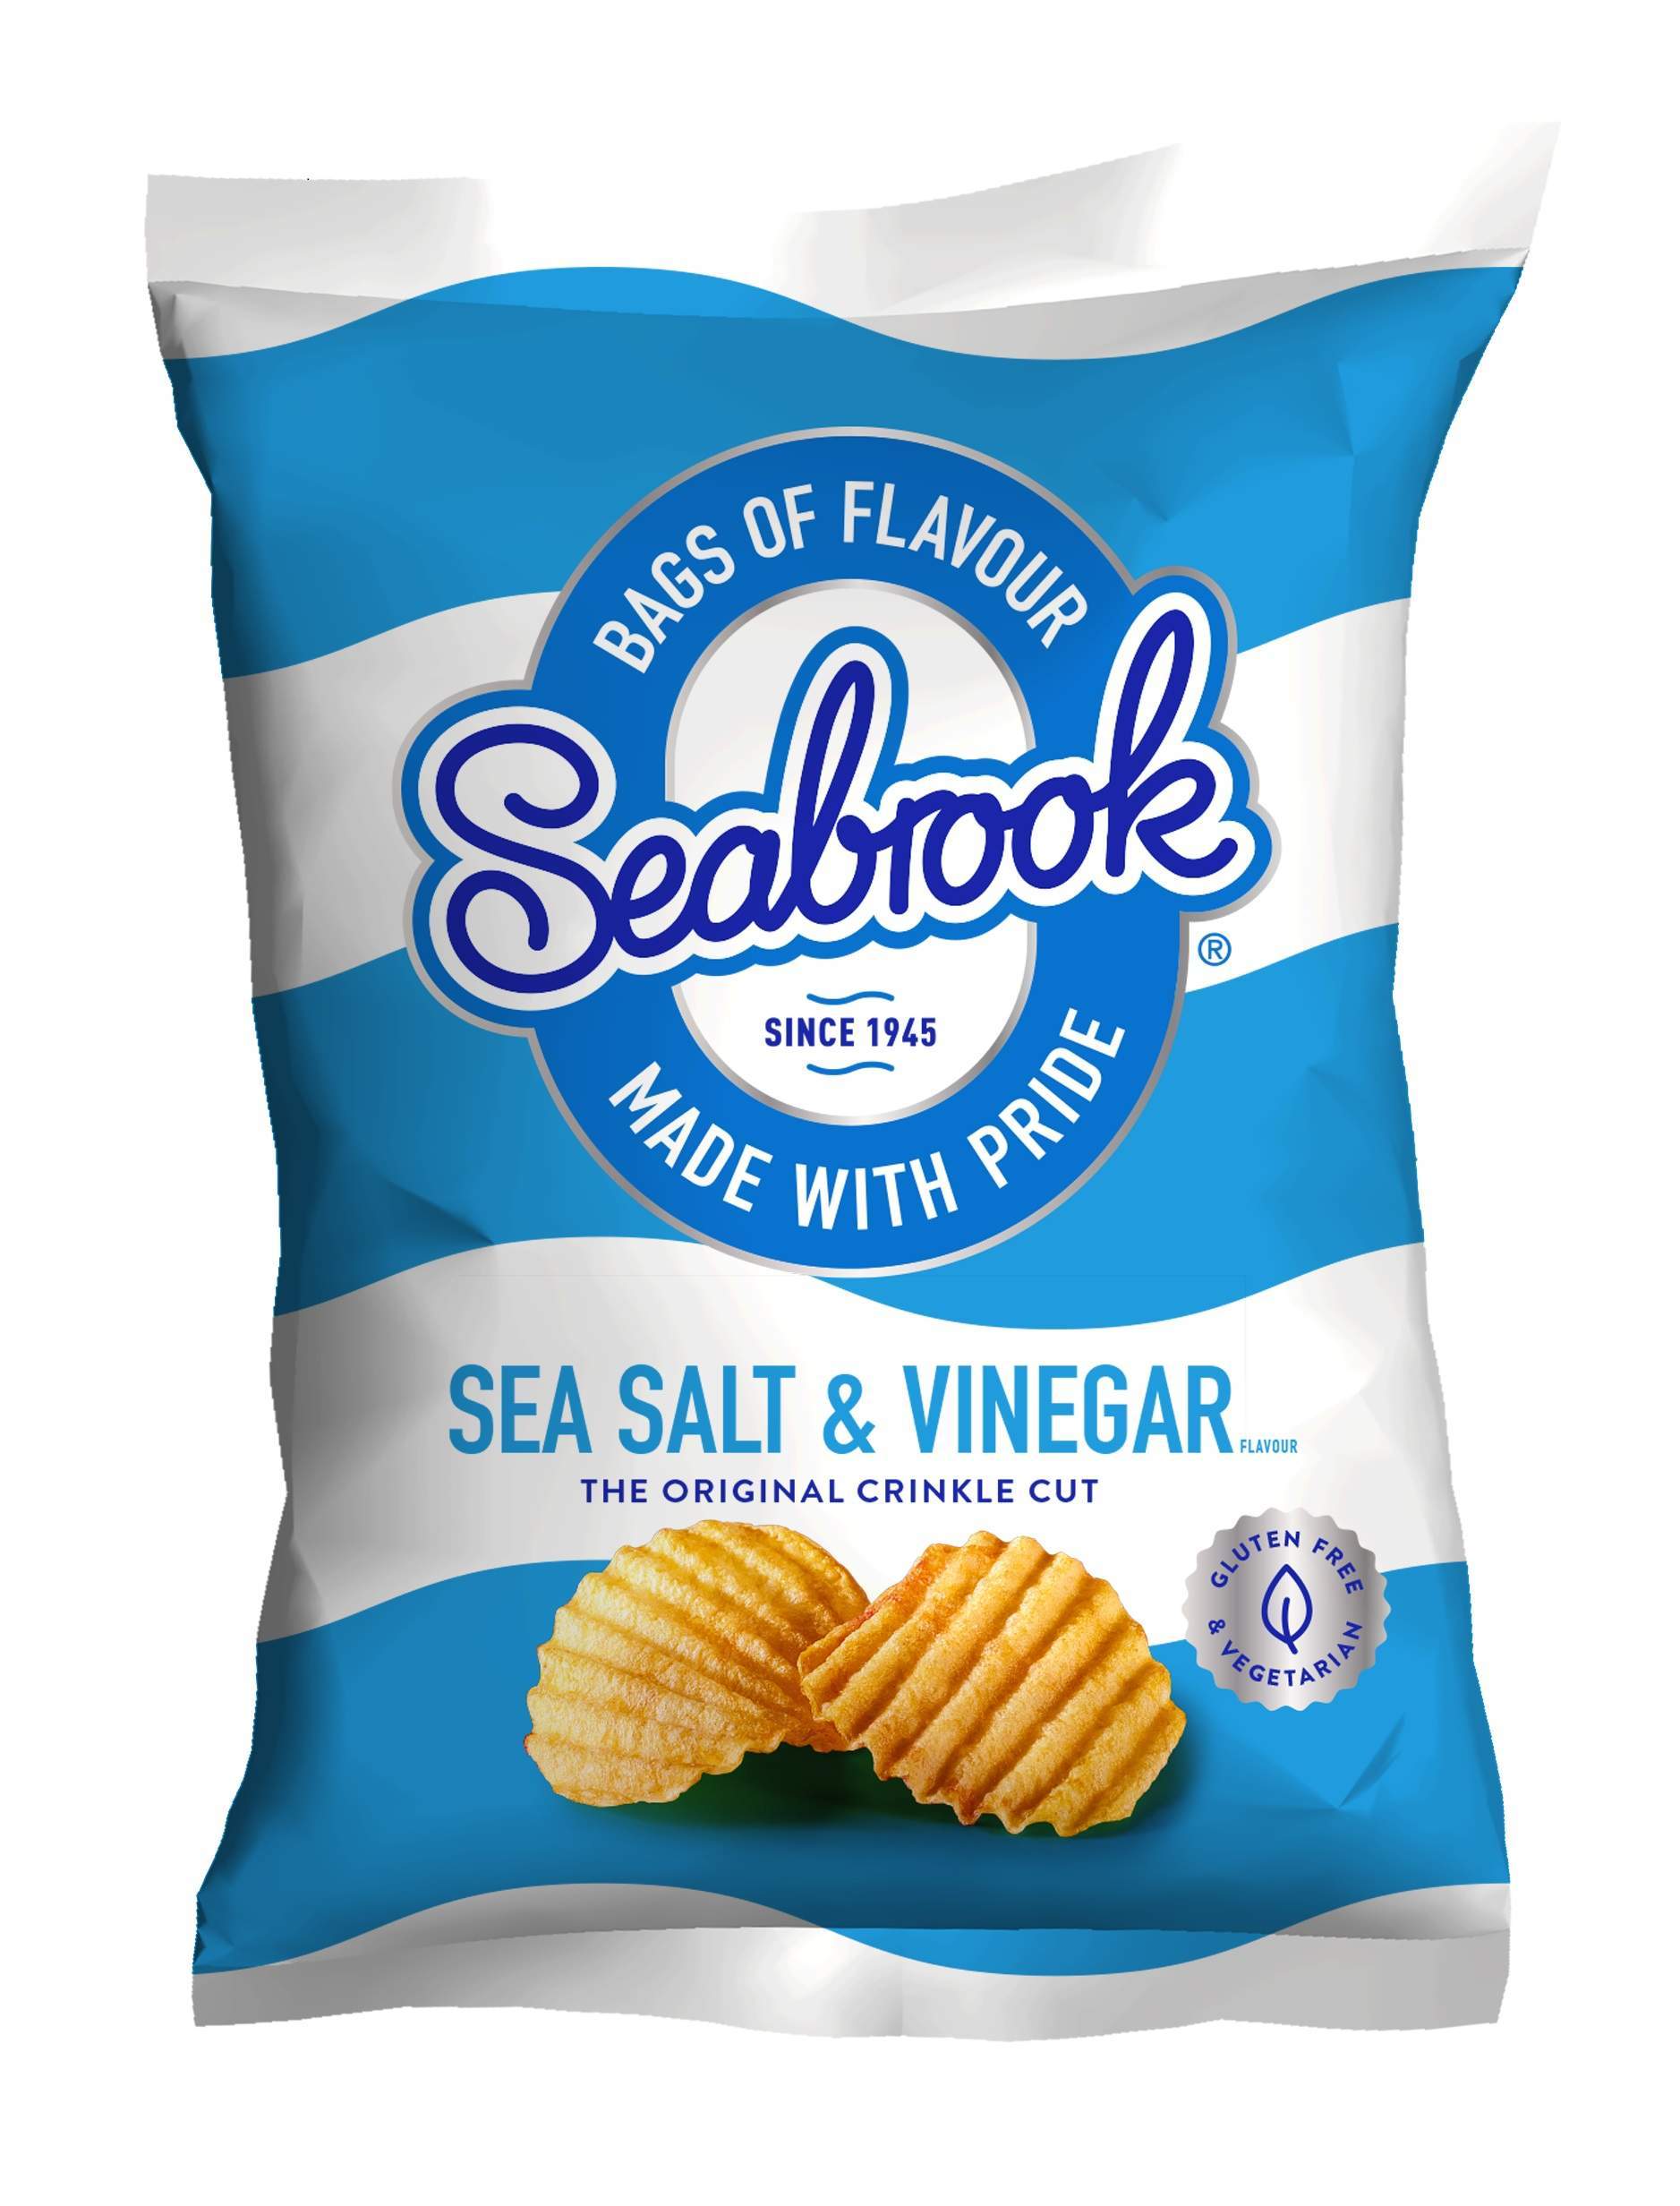 Robot Food bring ‘bags of flavour’ to Seabrook with a re-established ‘challenger’ positioning and rebrand